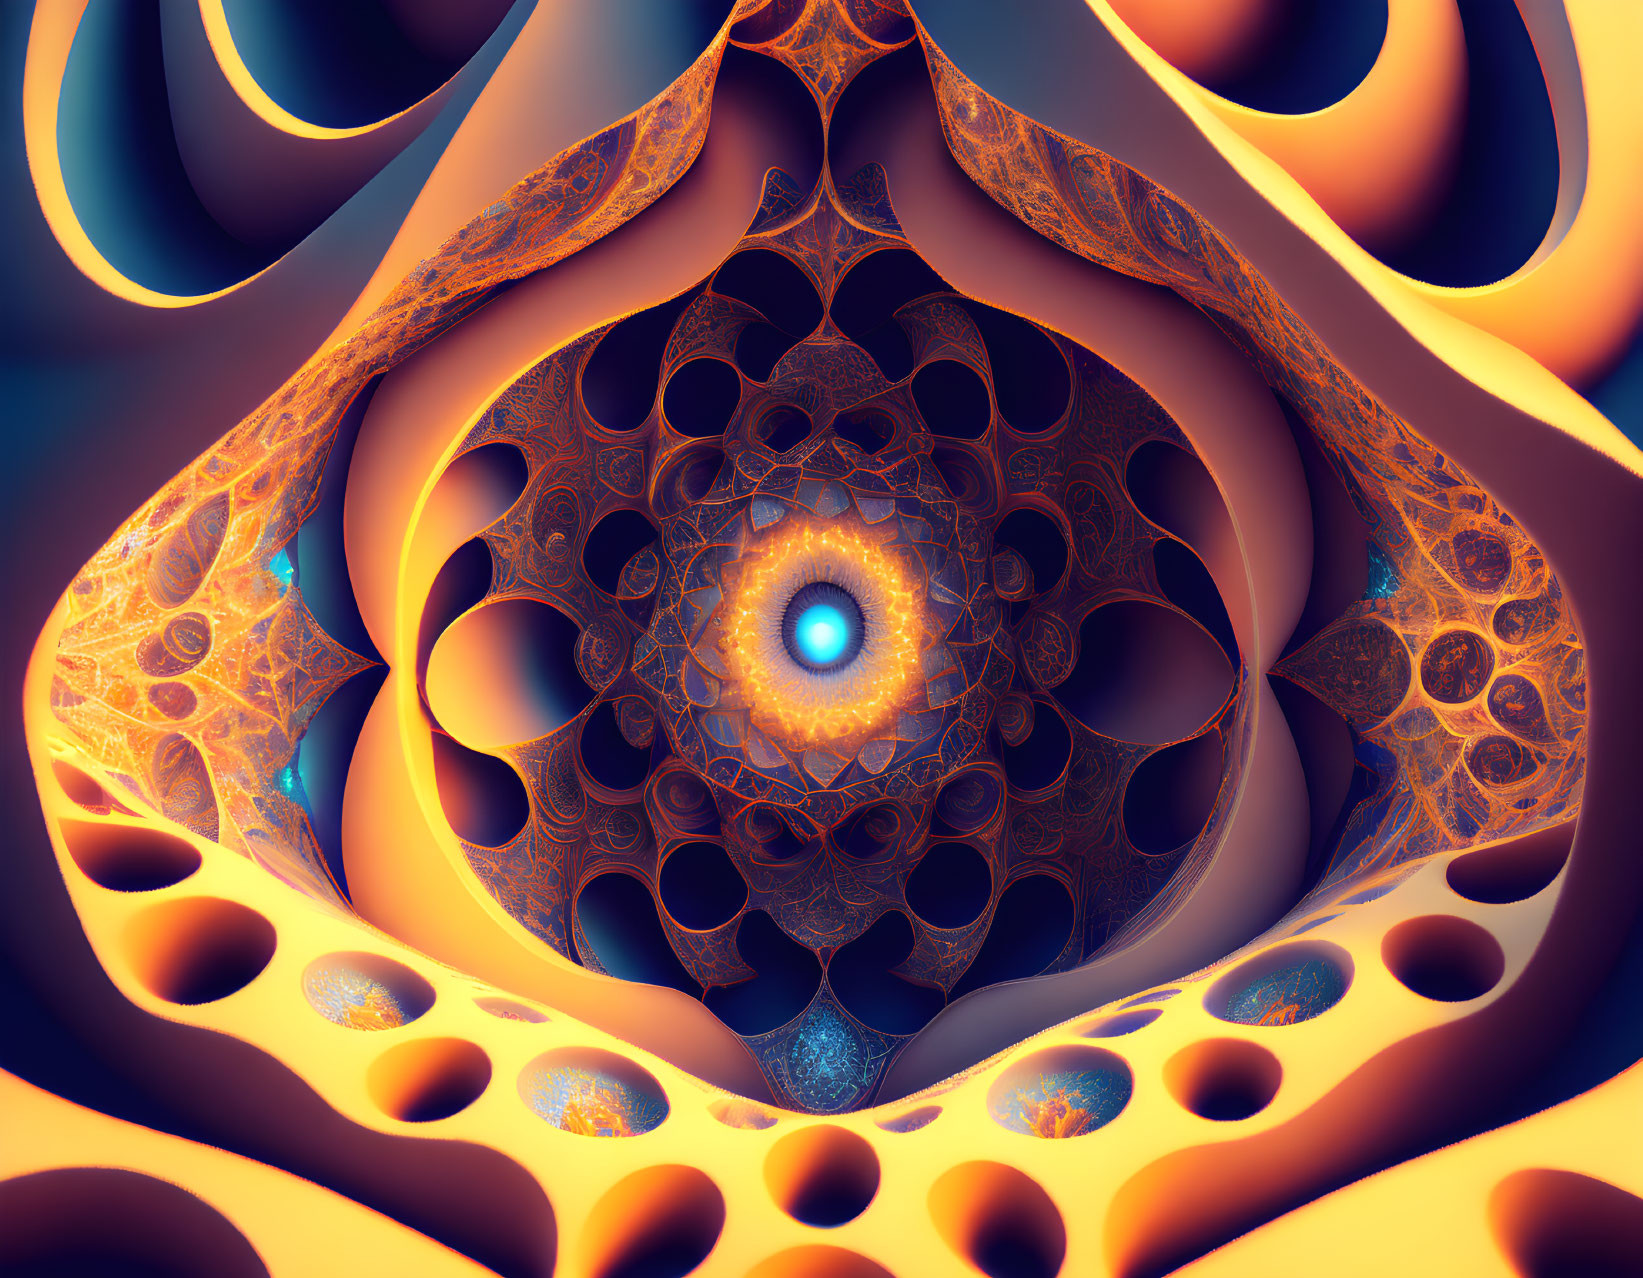 Lost in Fractals 